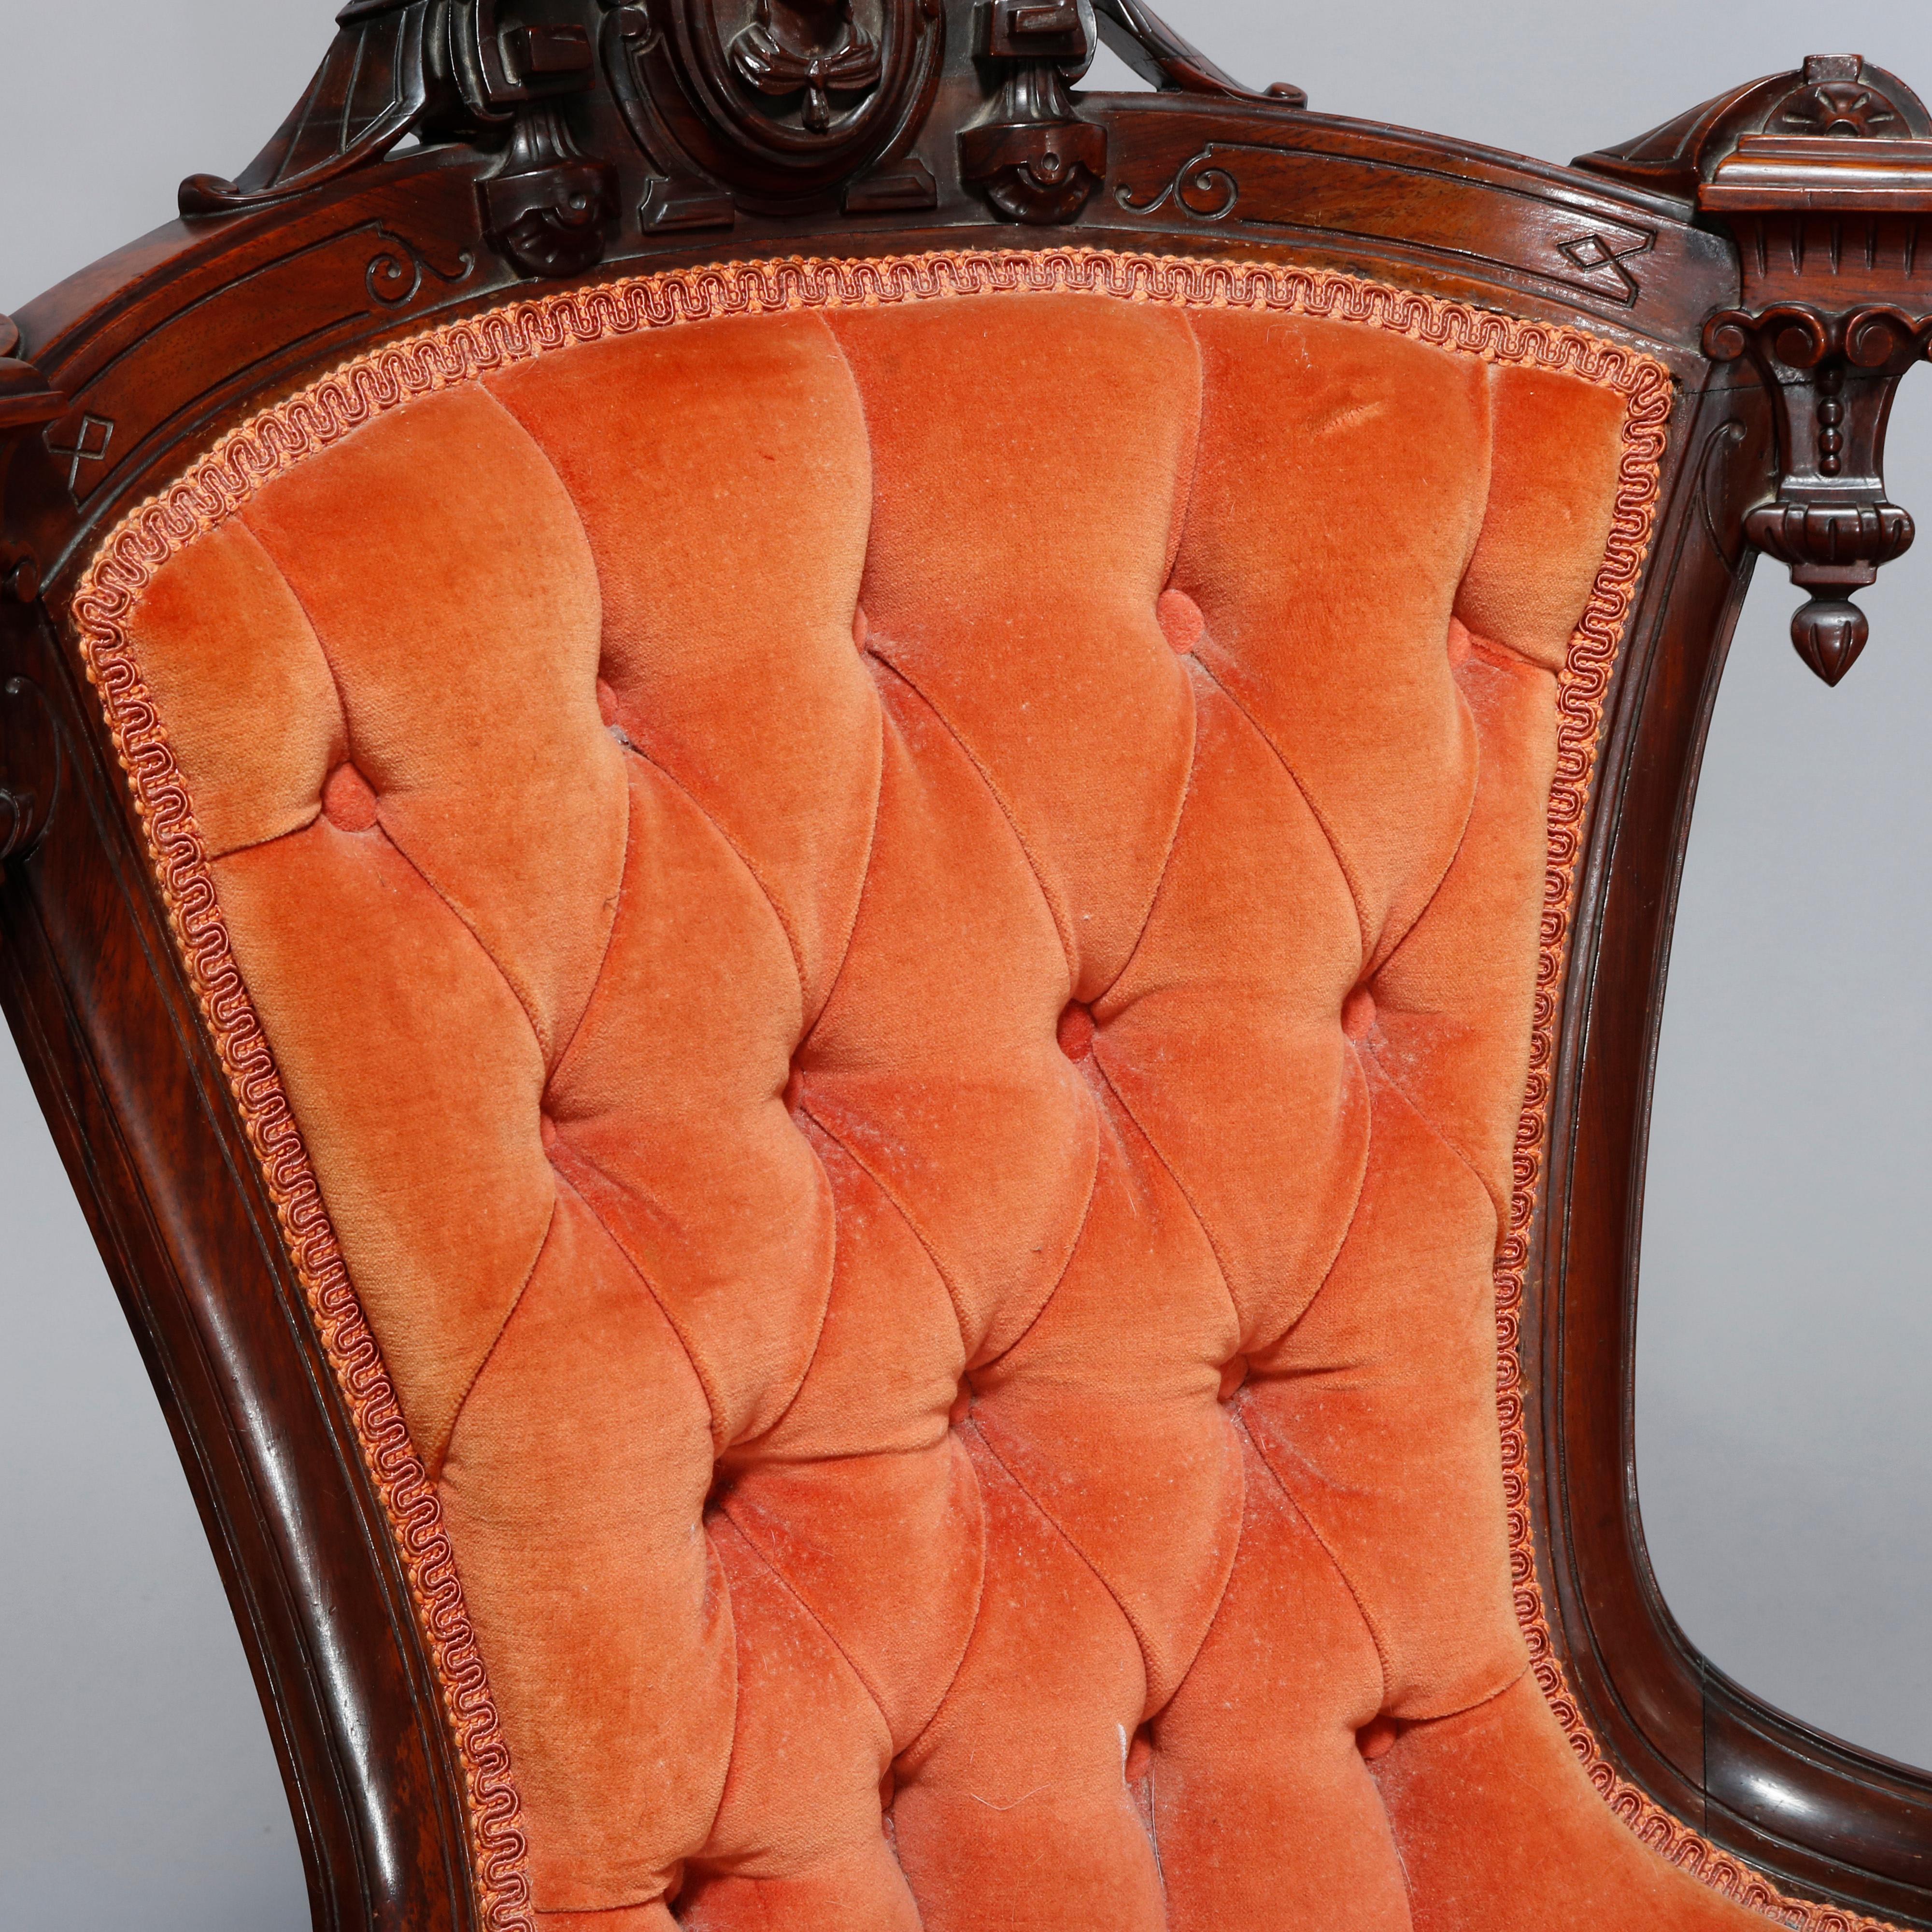 Upholstery Antique Pair Renaissance Revival Jelliff Carved Rosewood Figural Boudoir Chairs